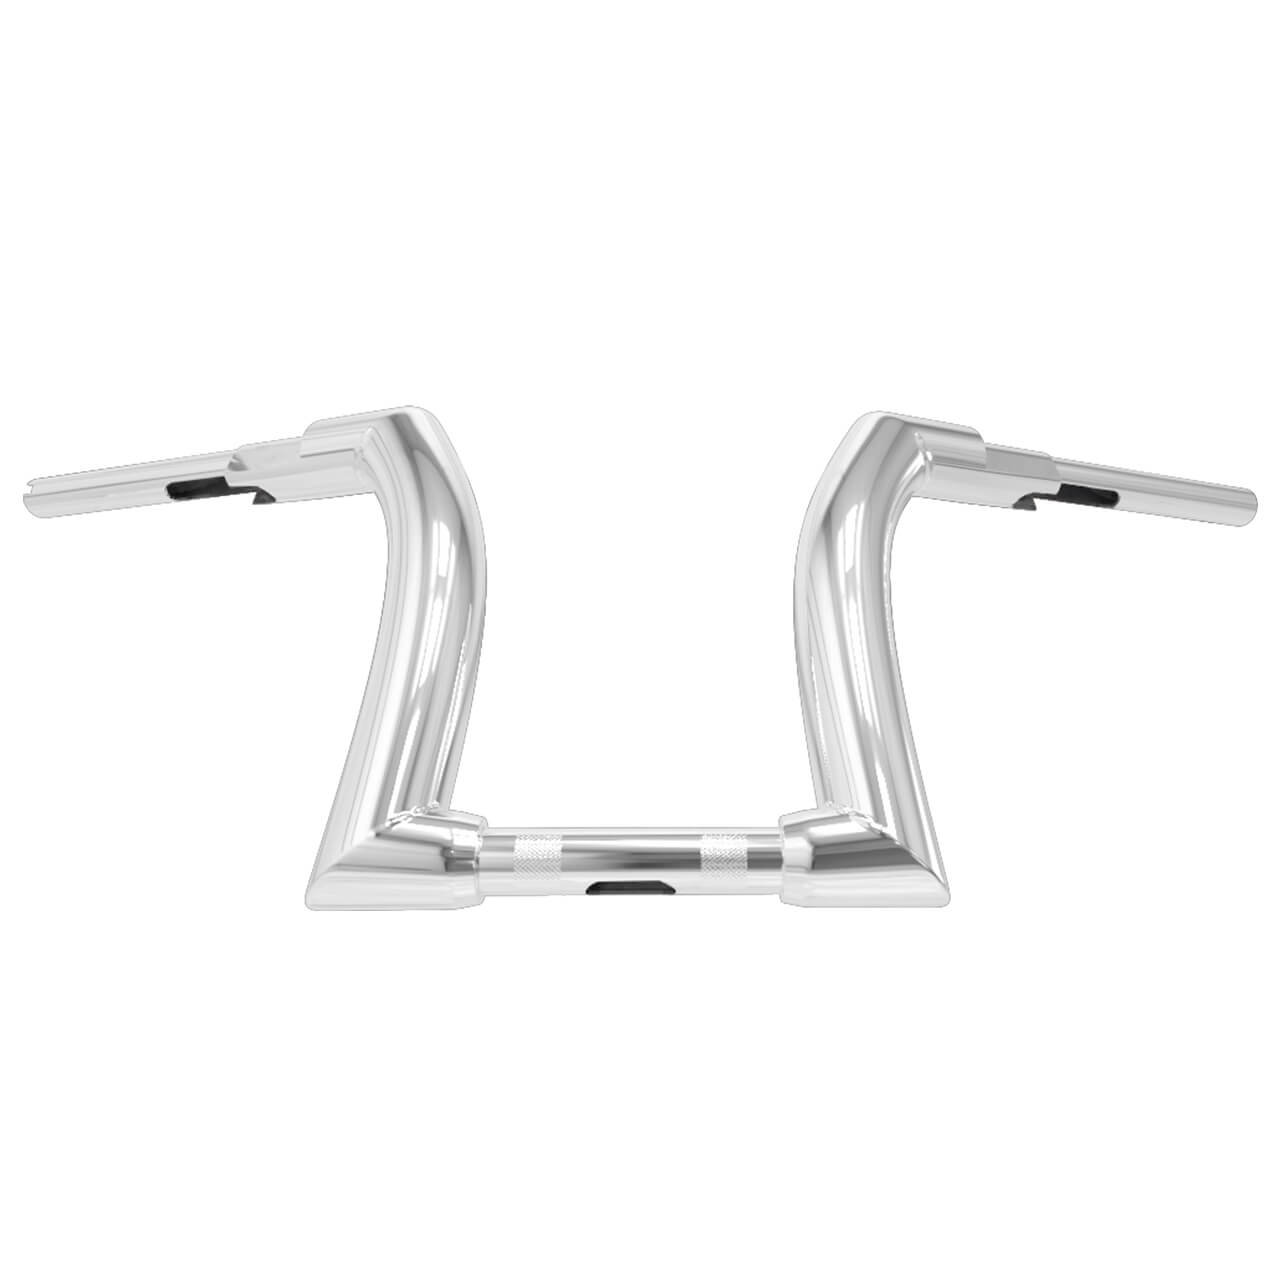 GP005205-mactions-14inches-rise-handlebar-for-harley-touring